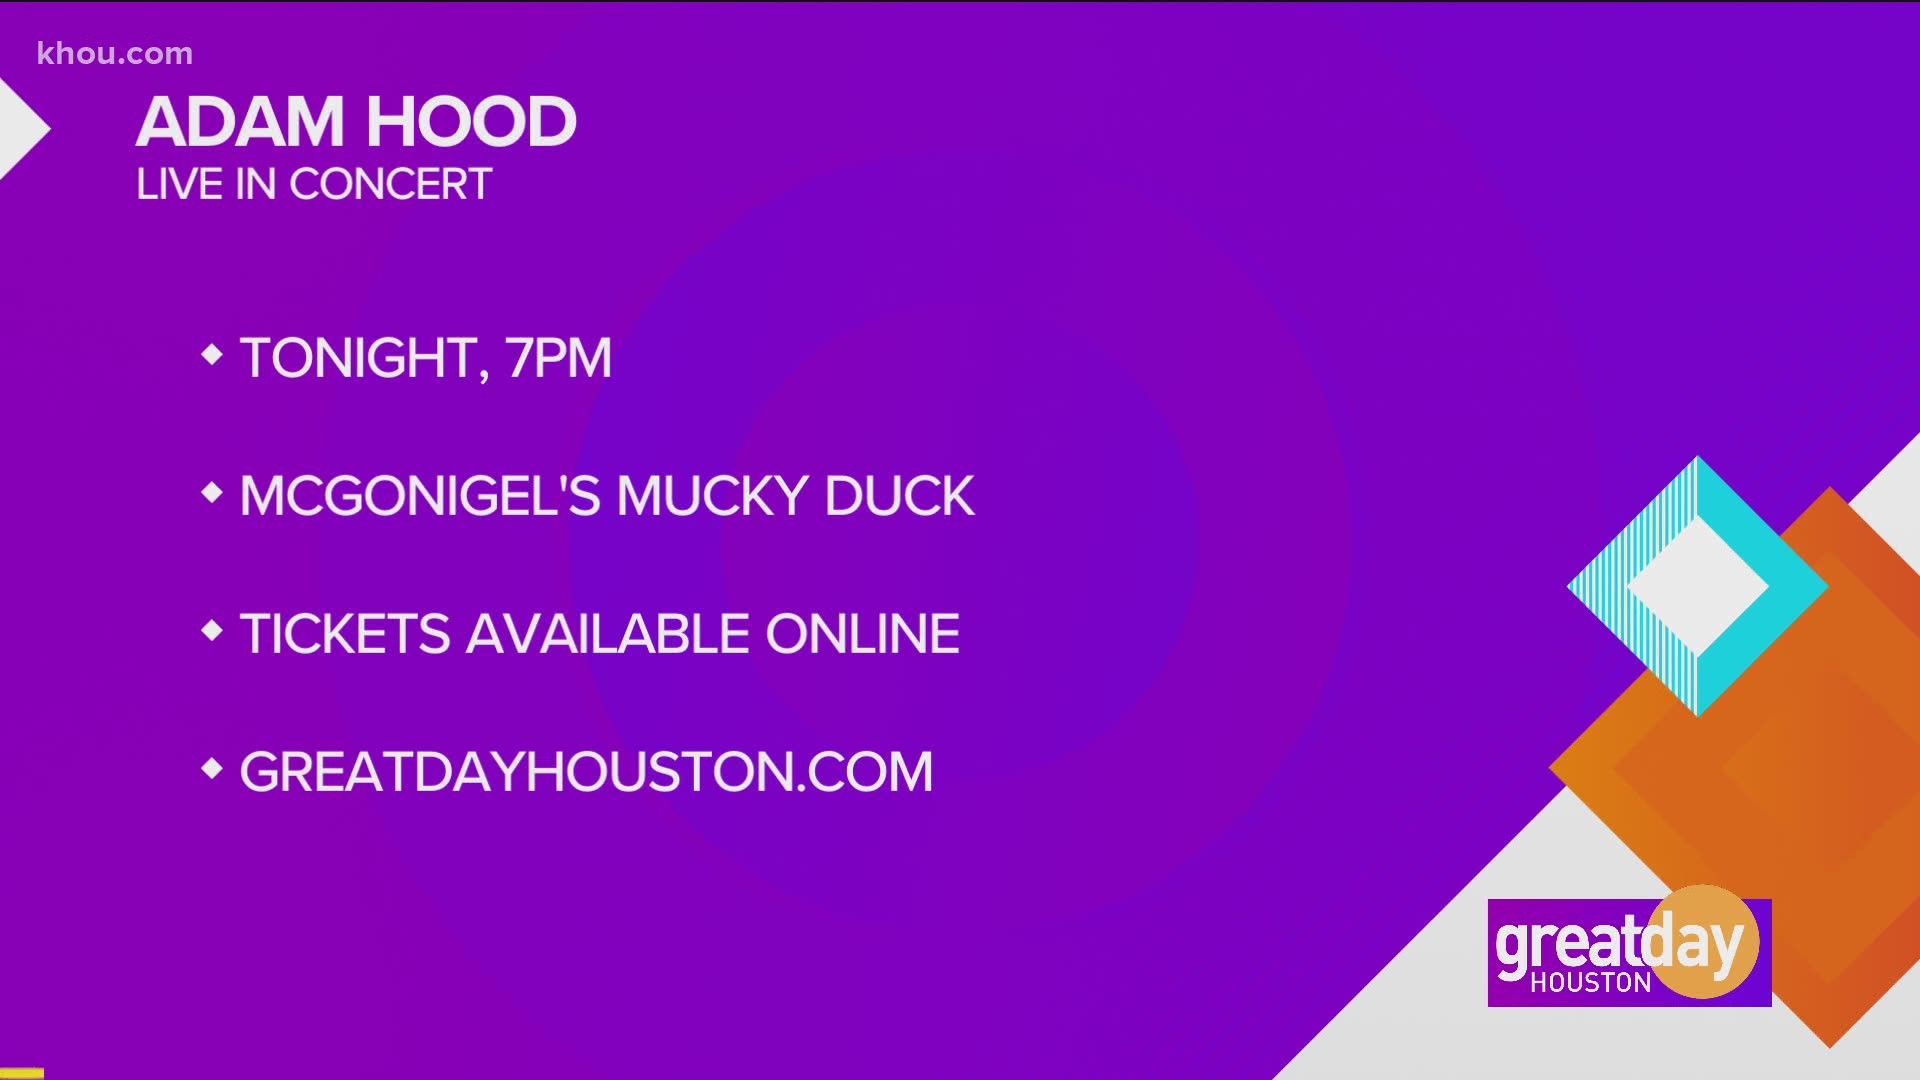 Adam Hood has a live, limited capacity concert tonight at McGonigel's Mucky Duck